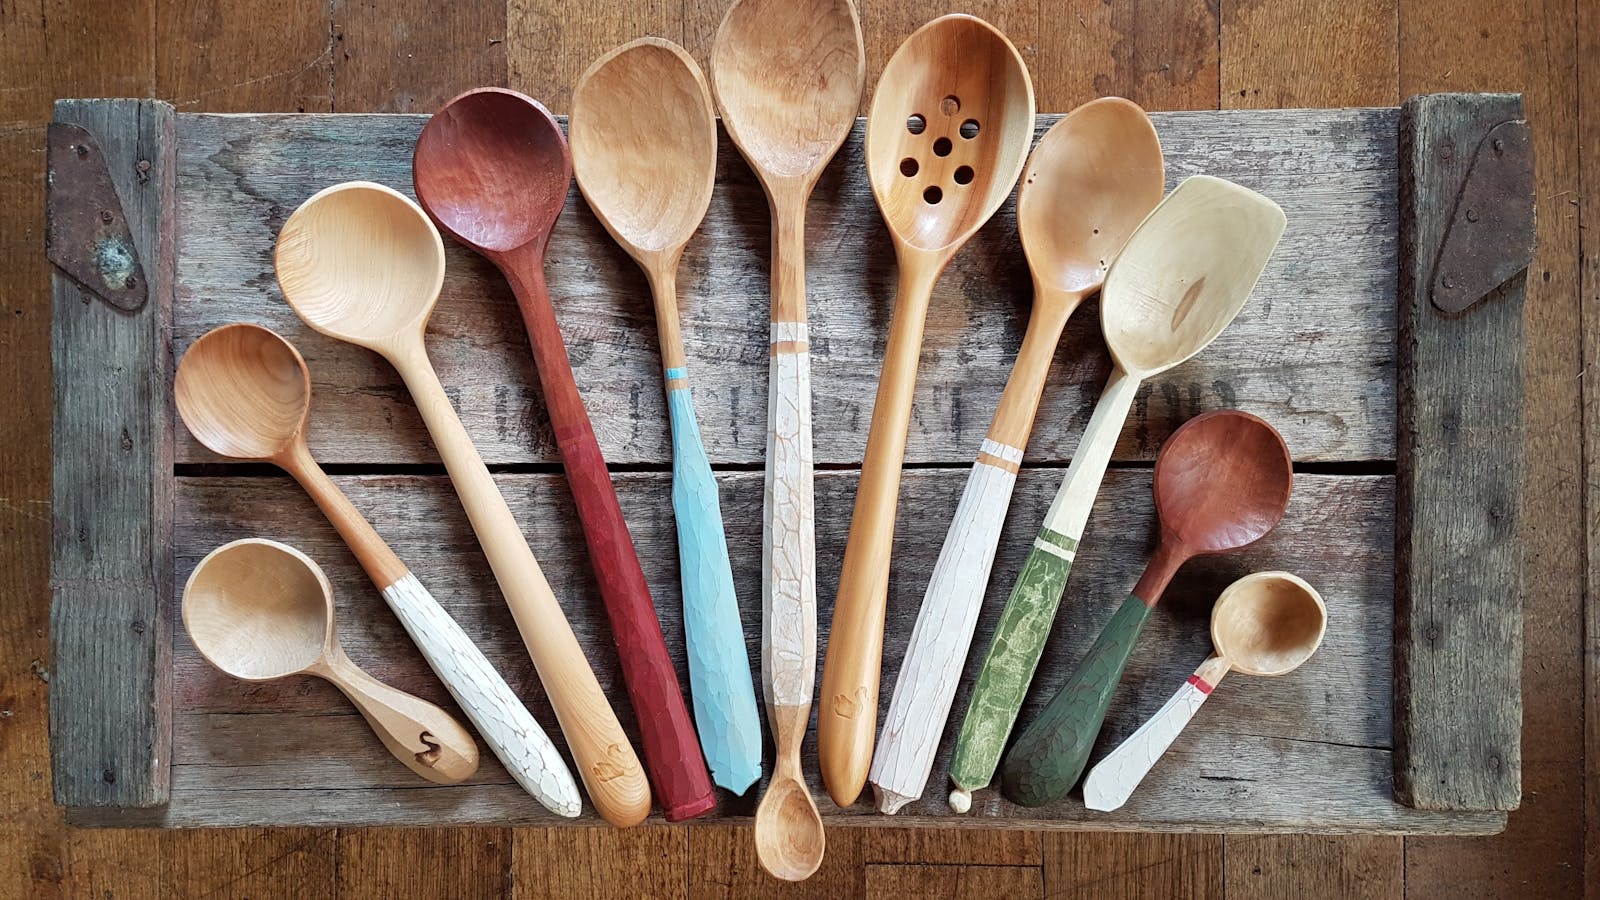 Many Spoons, one maker